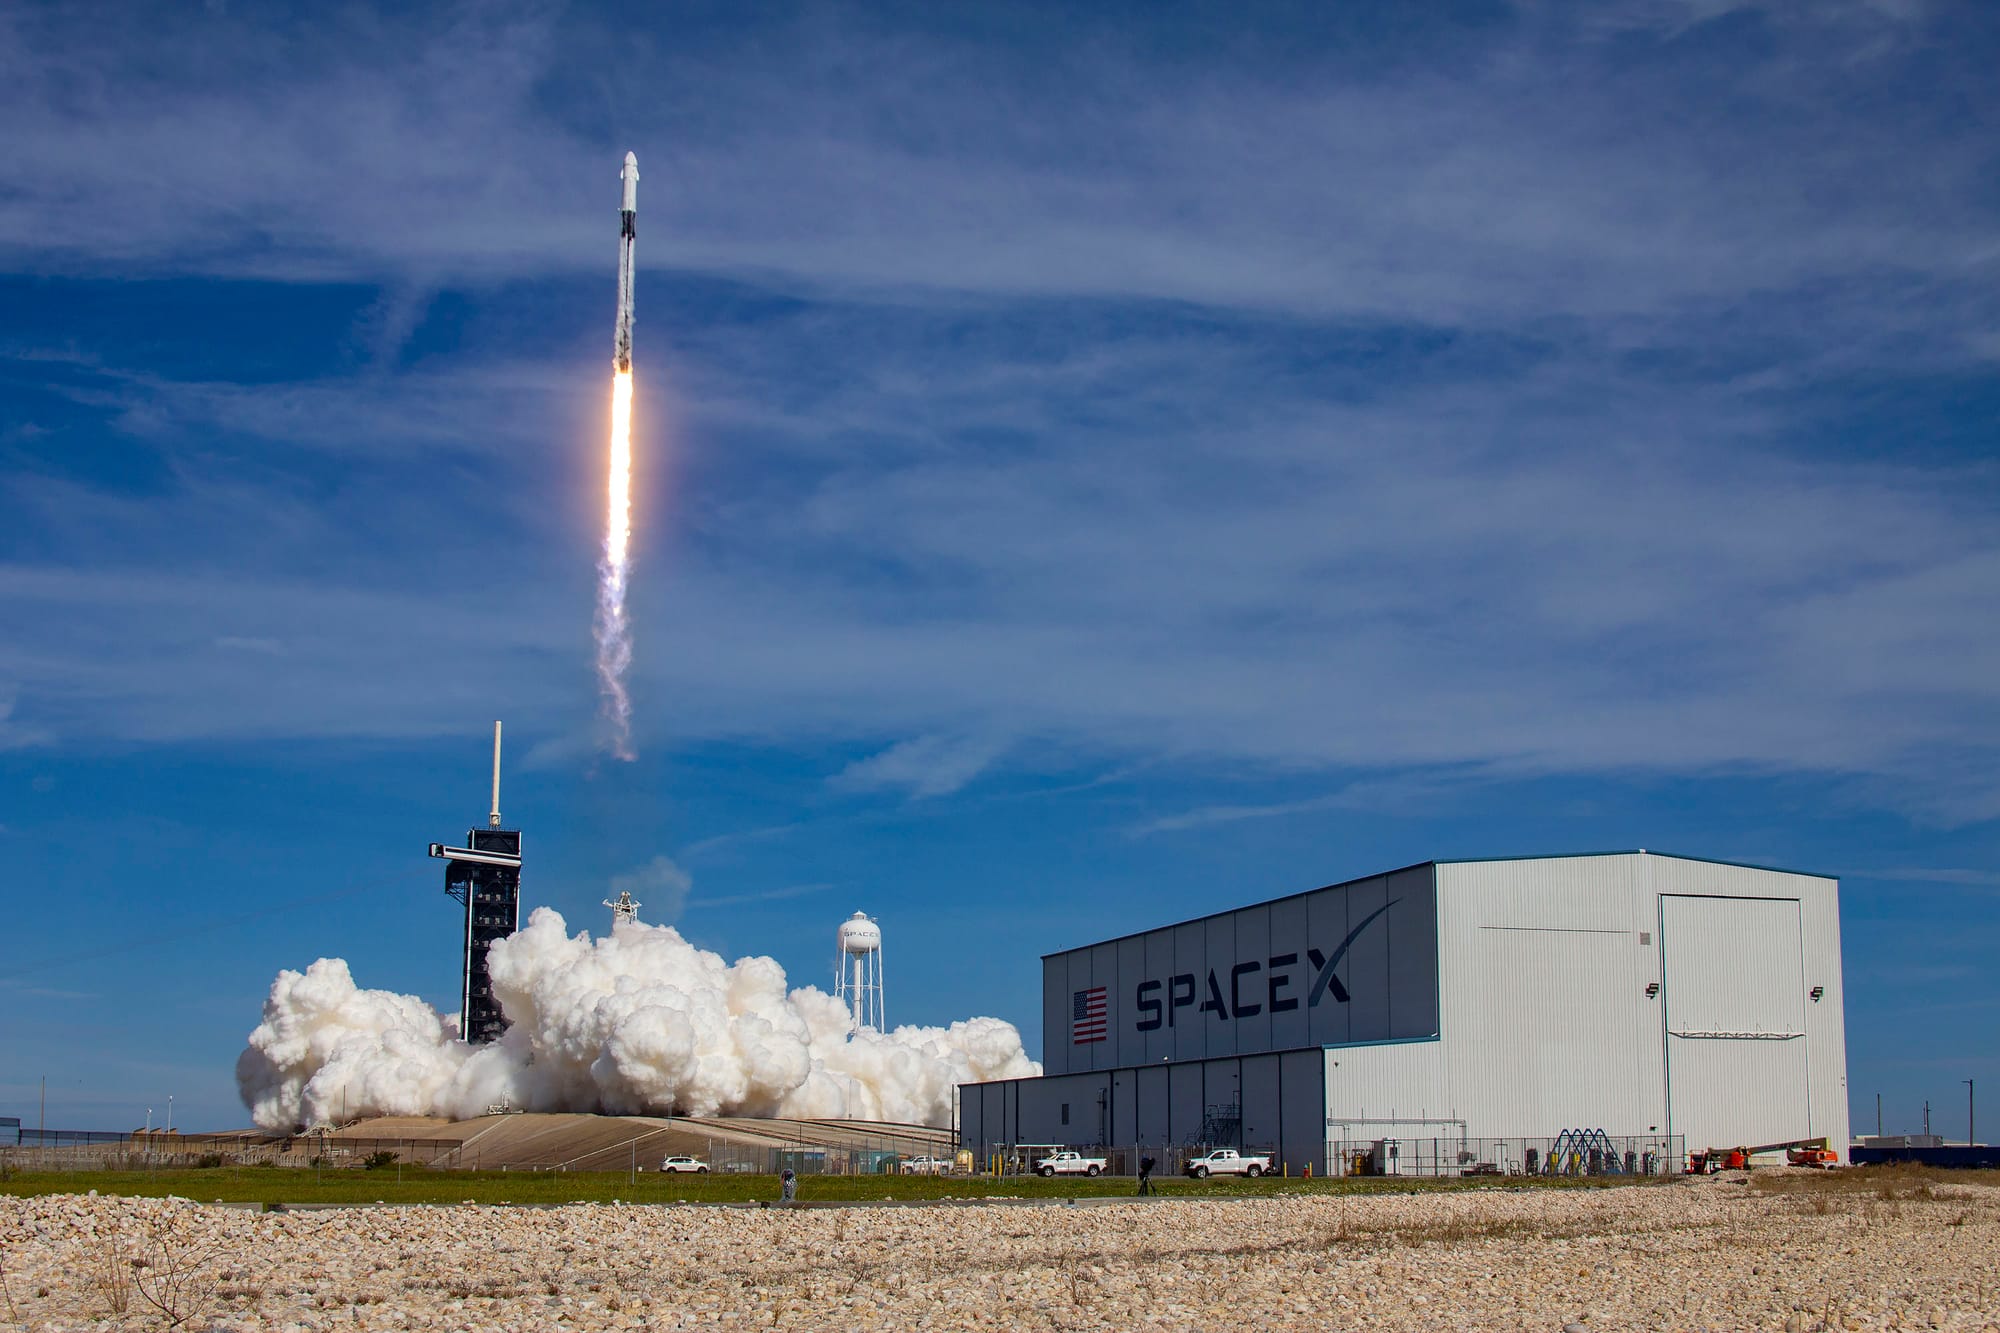 B1058 lifting off from LC-39A for CRS-21. ©SpaceX